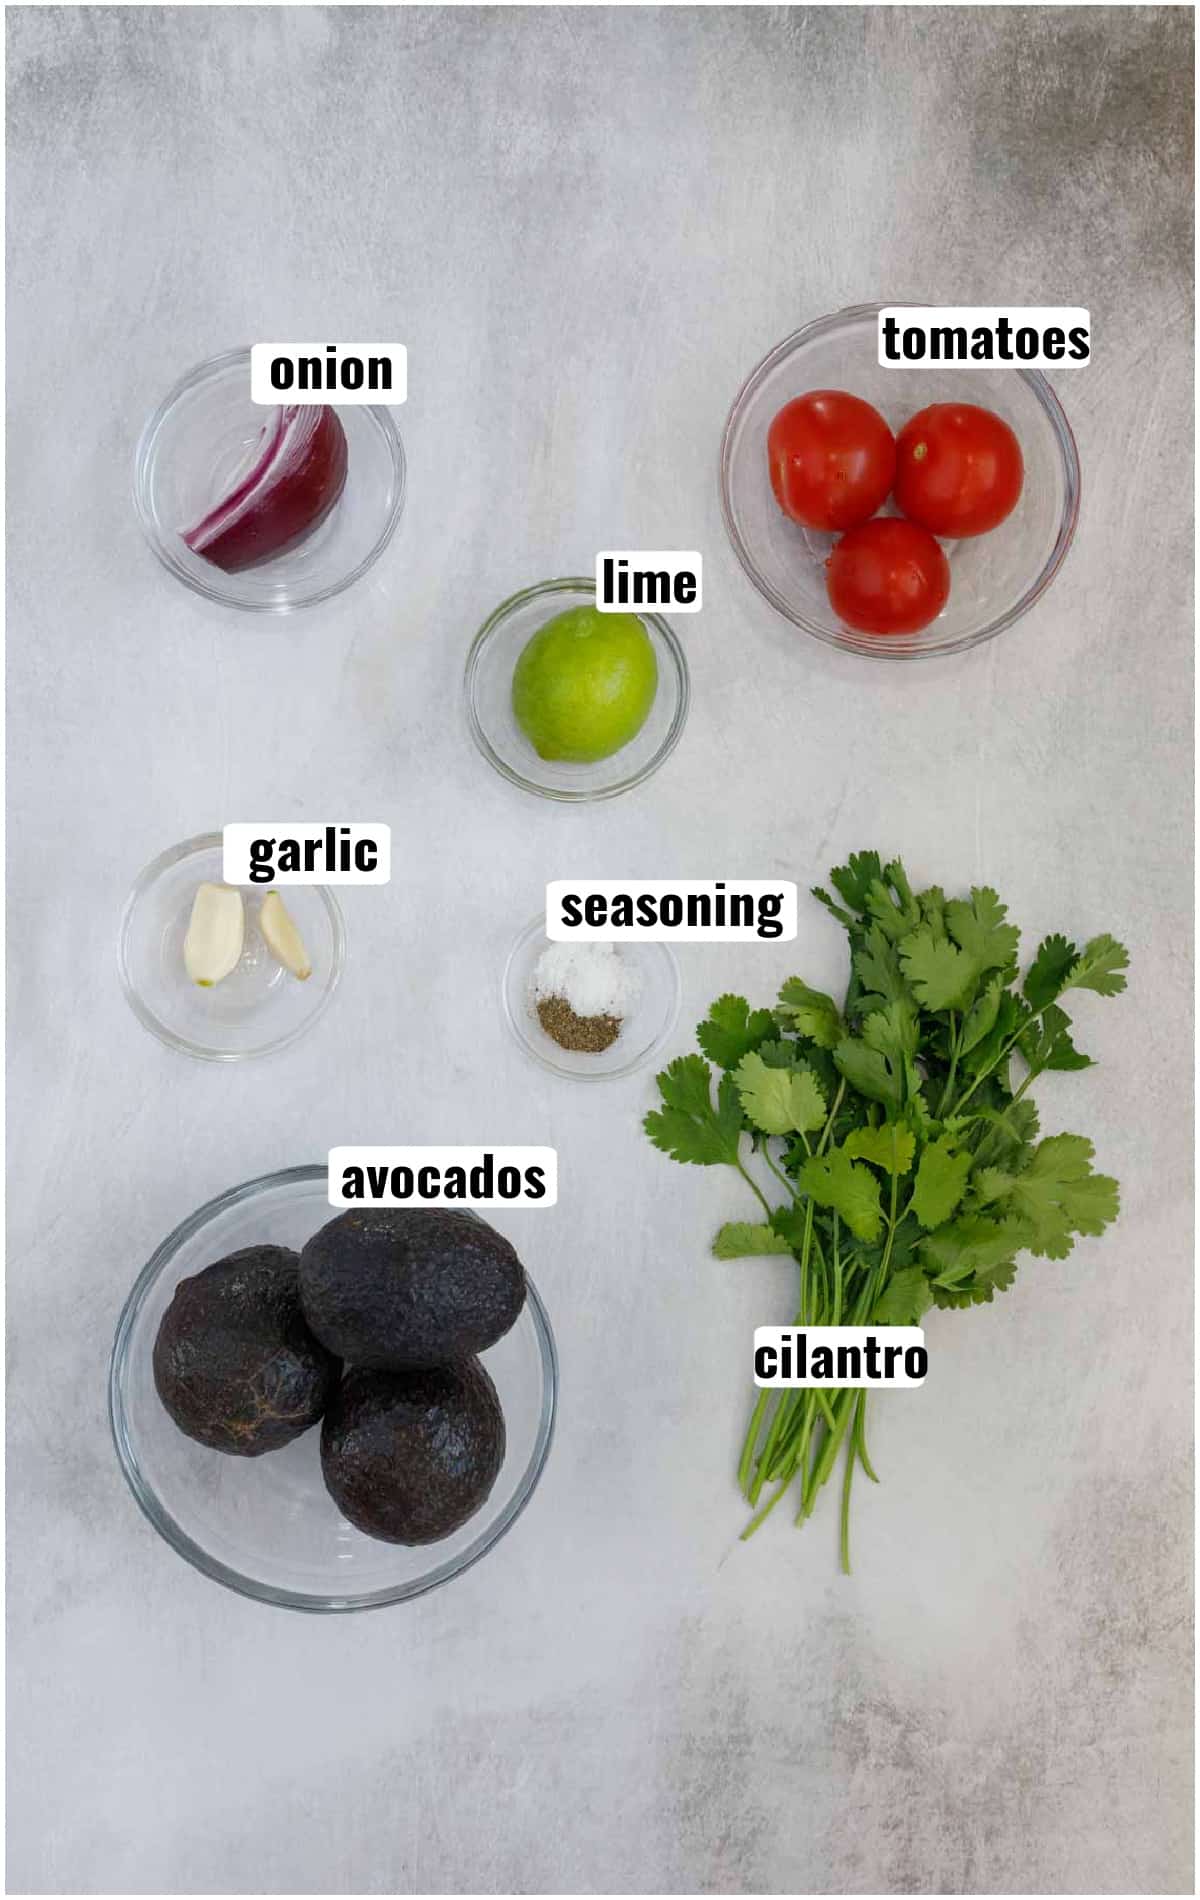 All ingredients needed to make guacamole.